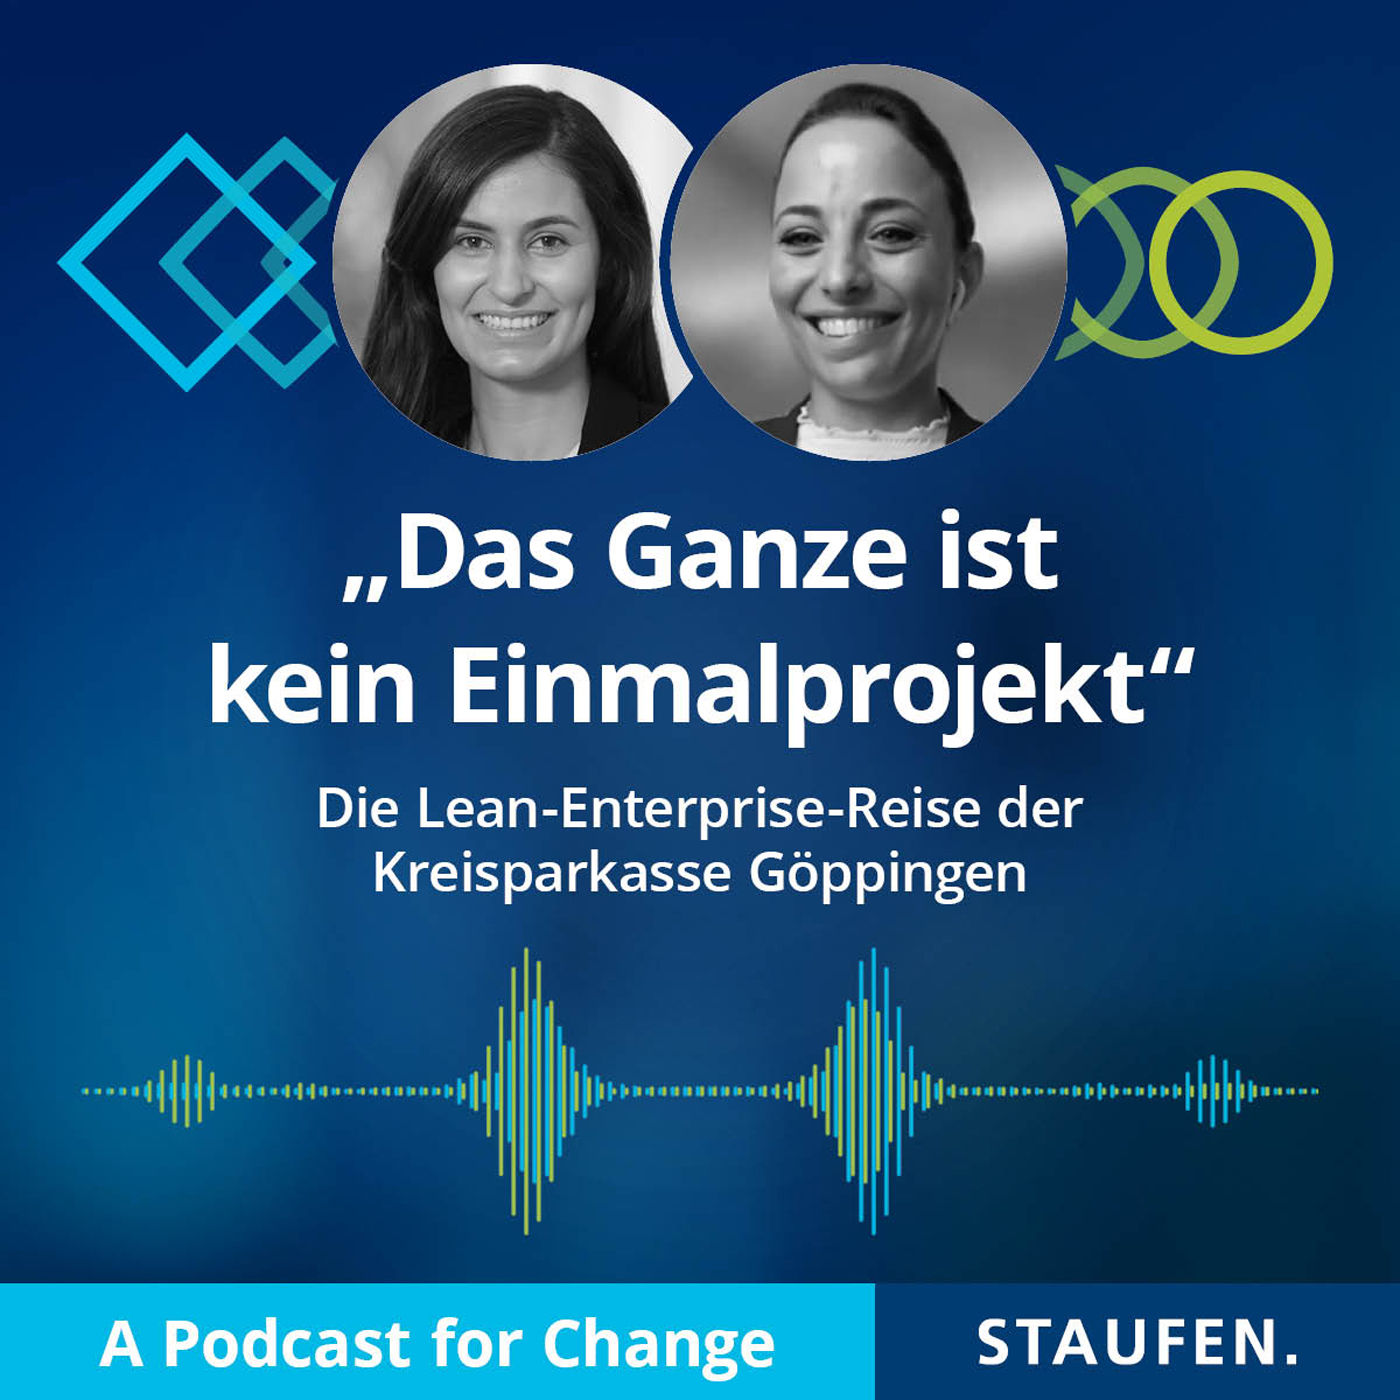 A Podcast for Change by STAUFEN.